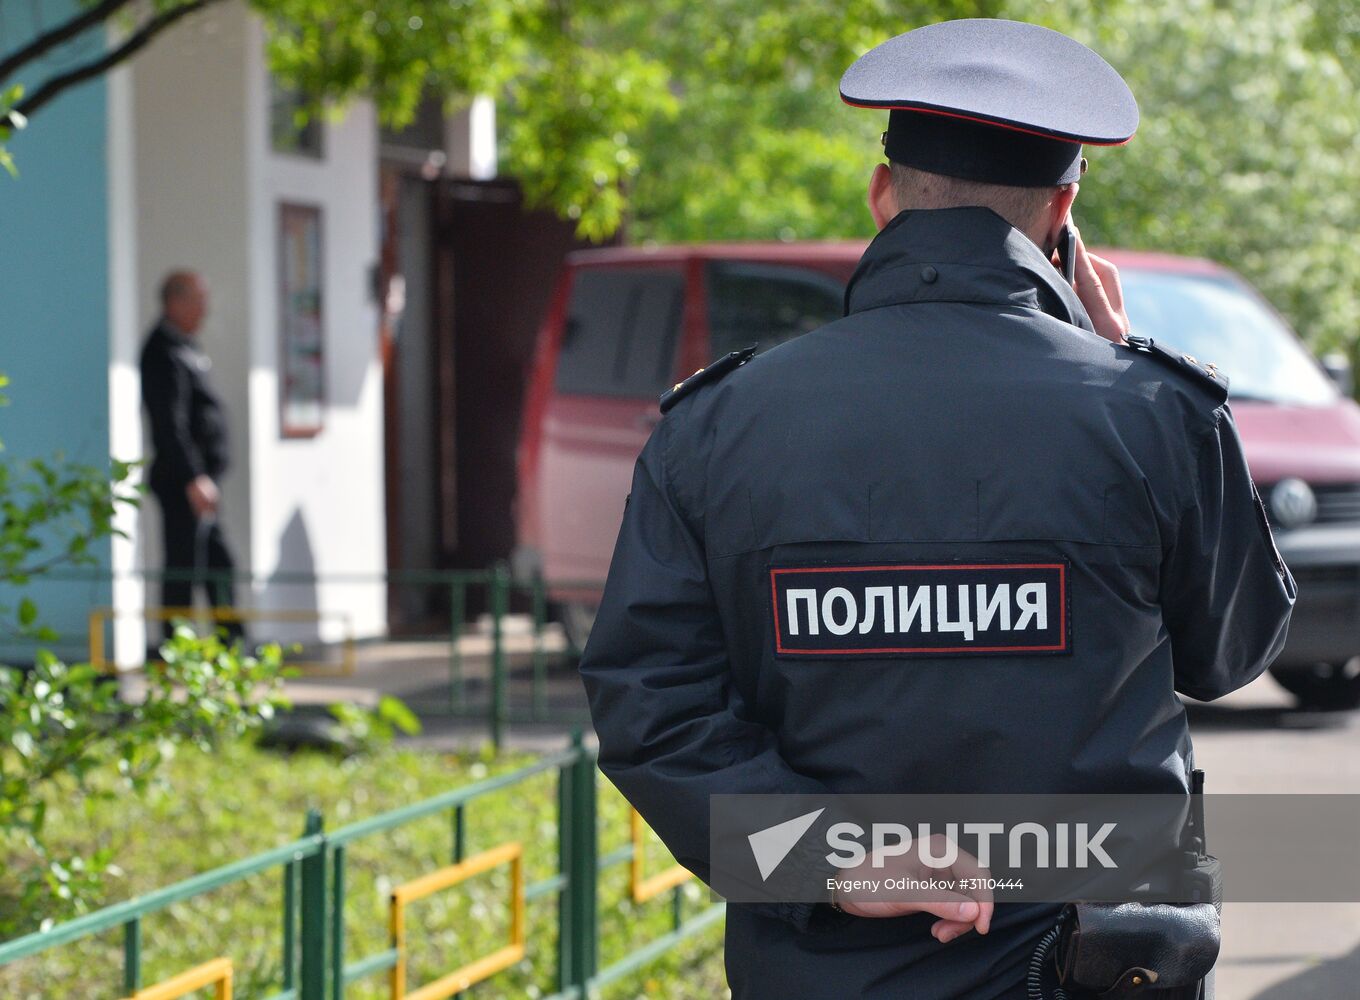 FSS of the Russian Federation officials arrested members of ISIS terrorist group prohibited in Russia